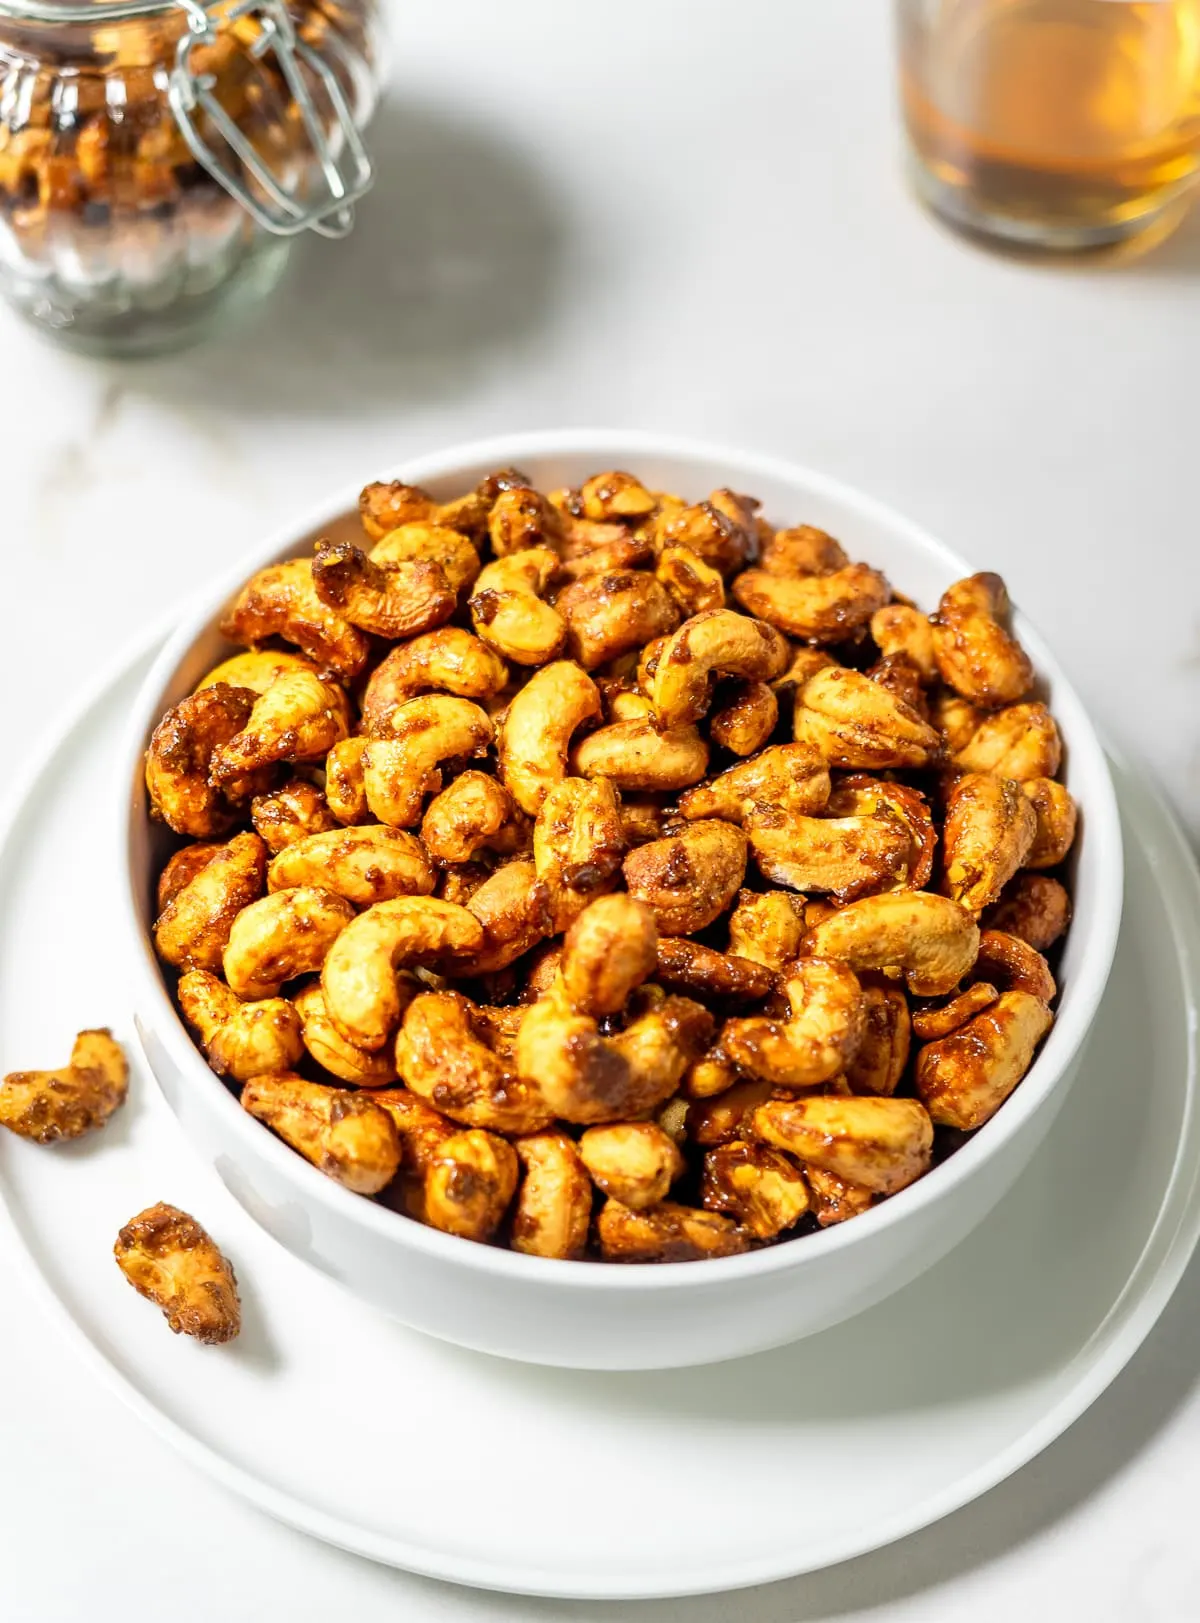 Bowl filled with roasted curry cashews.